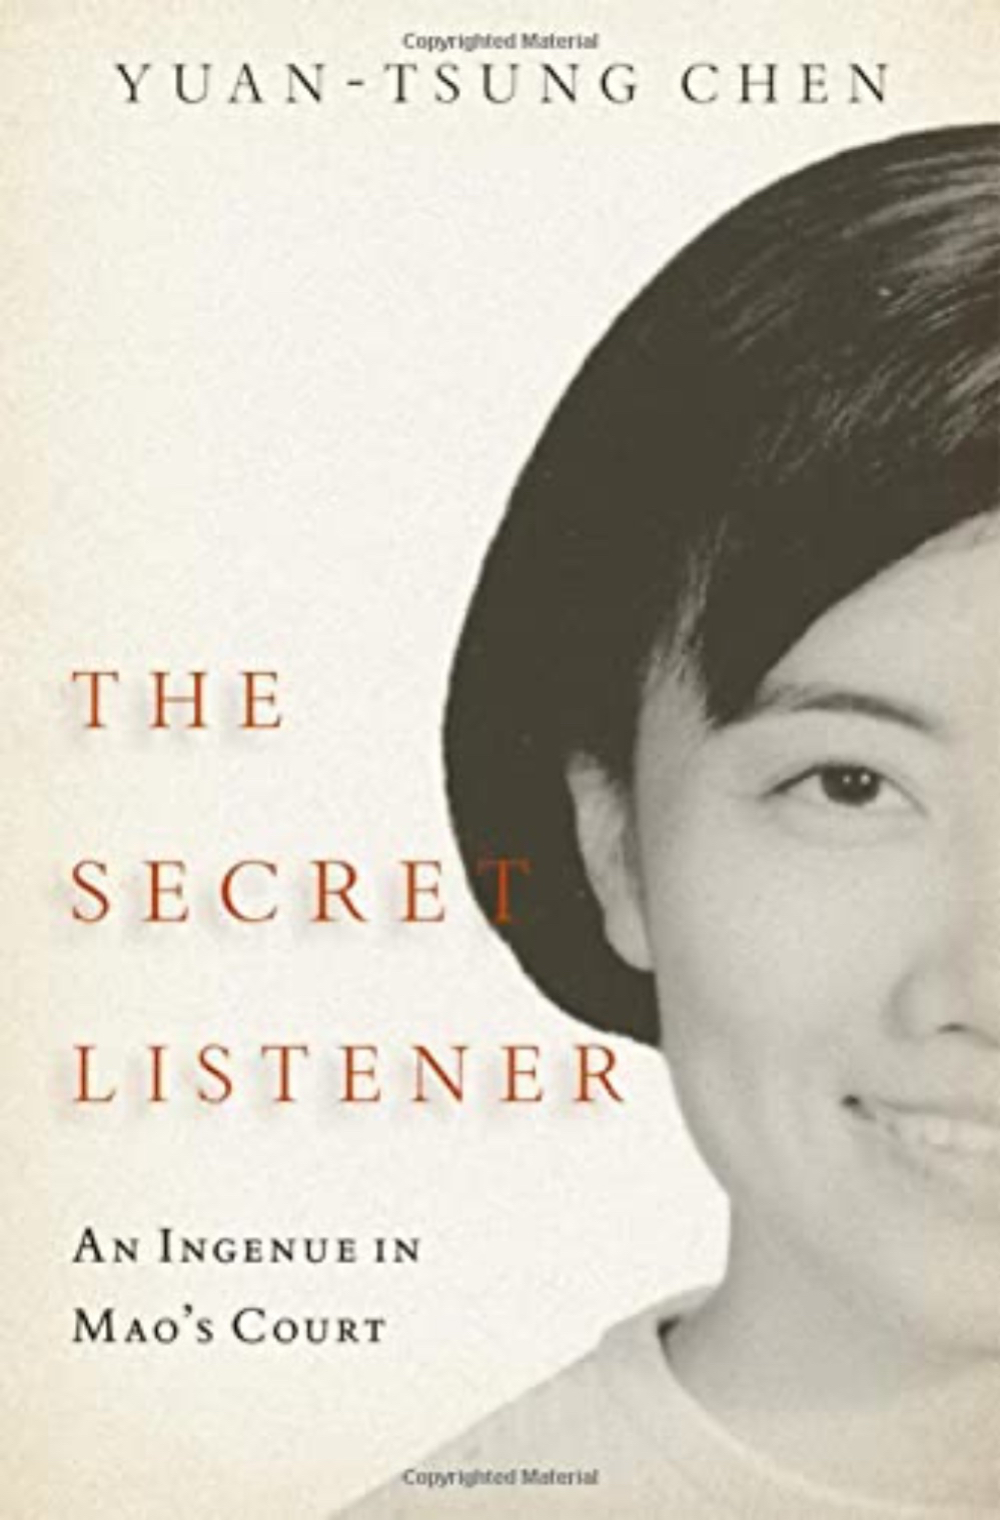 The Secret Listener: An Ingenue in Mao's Court by Yuan-tsung Chen